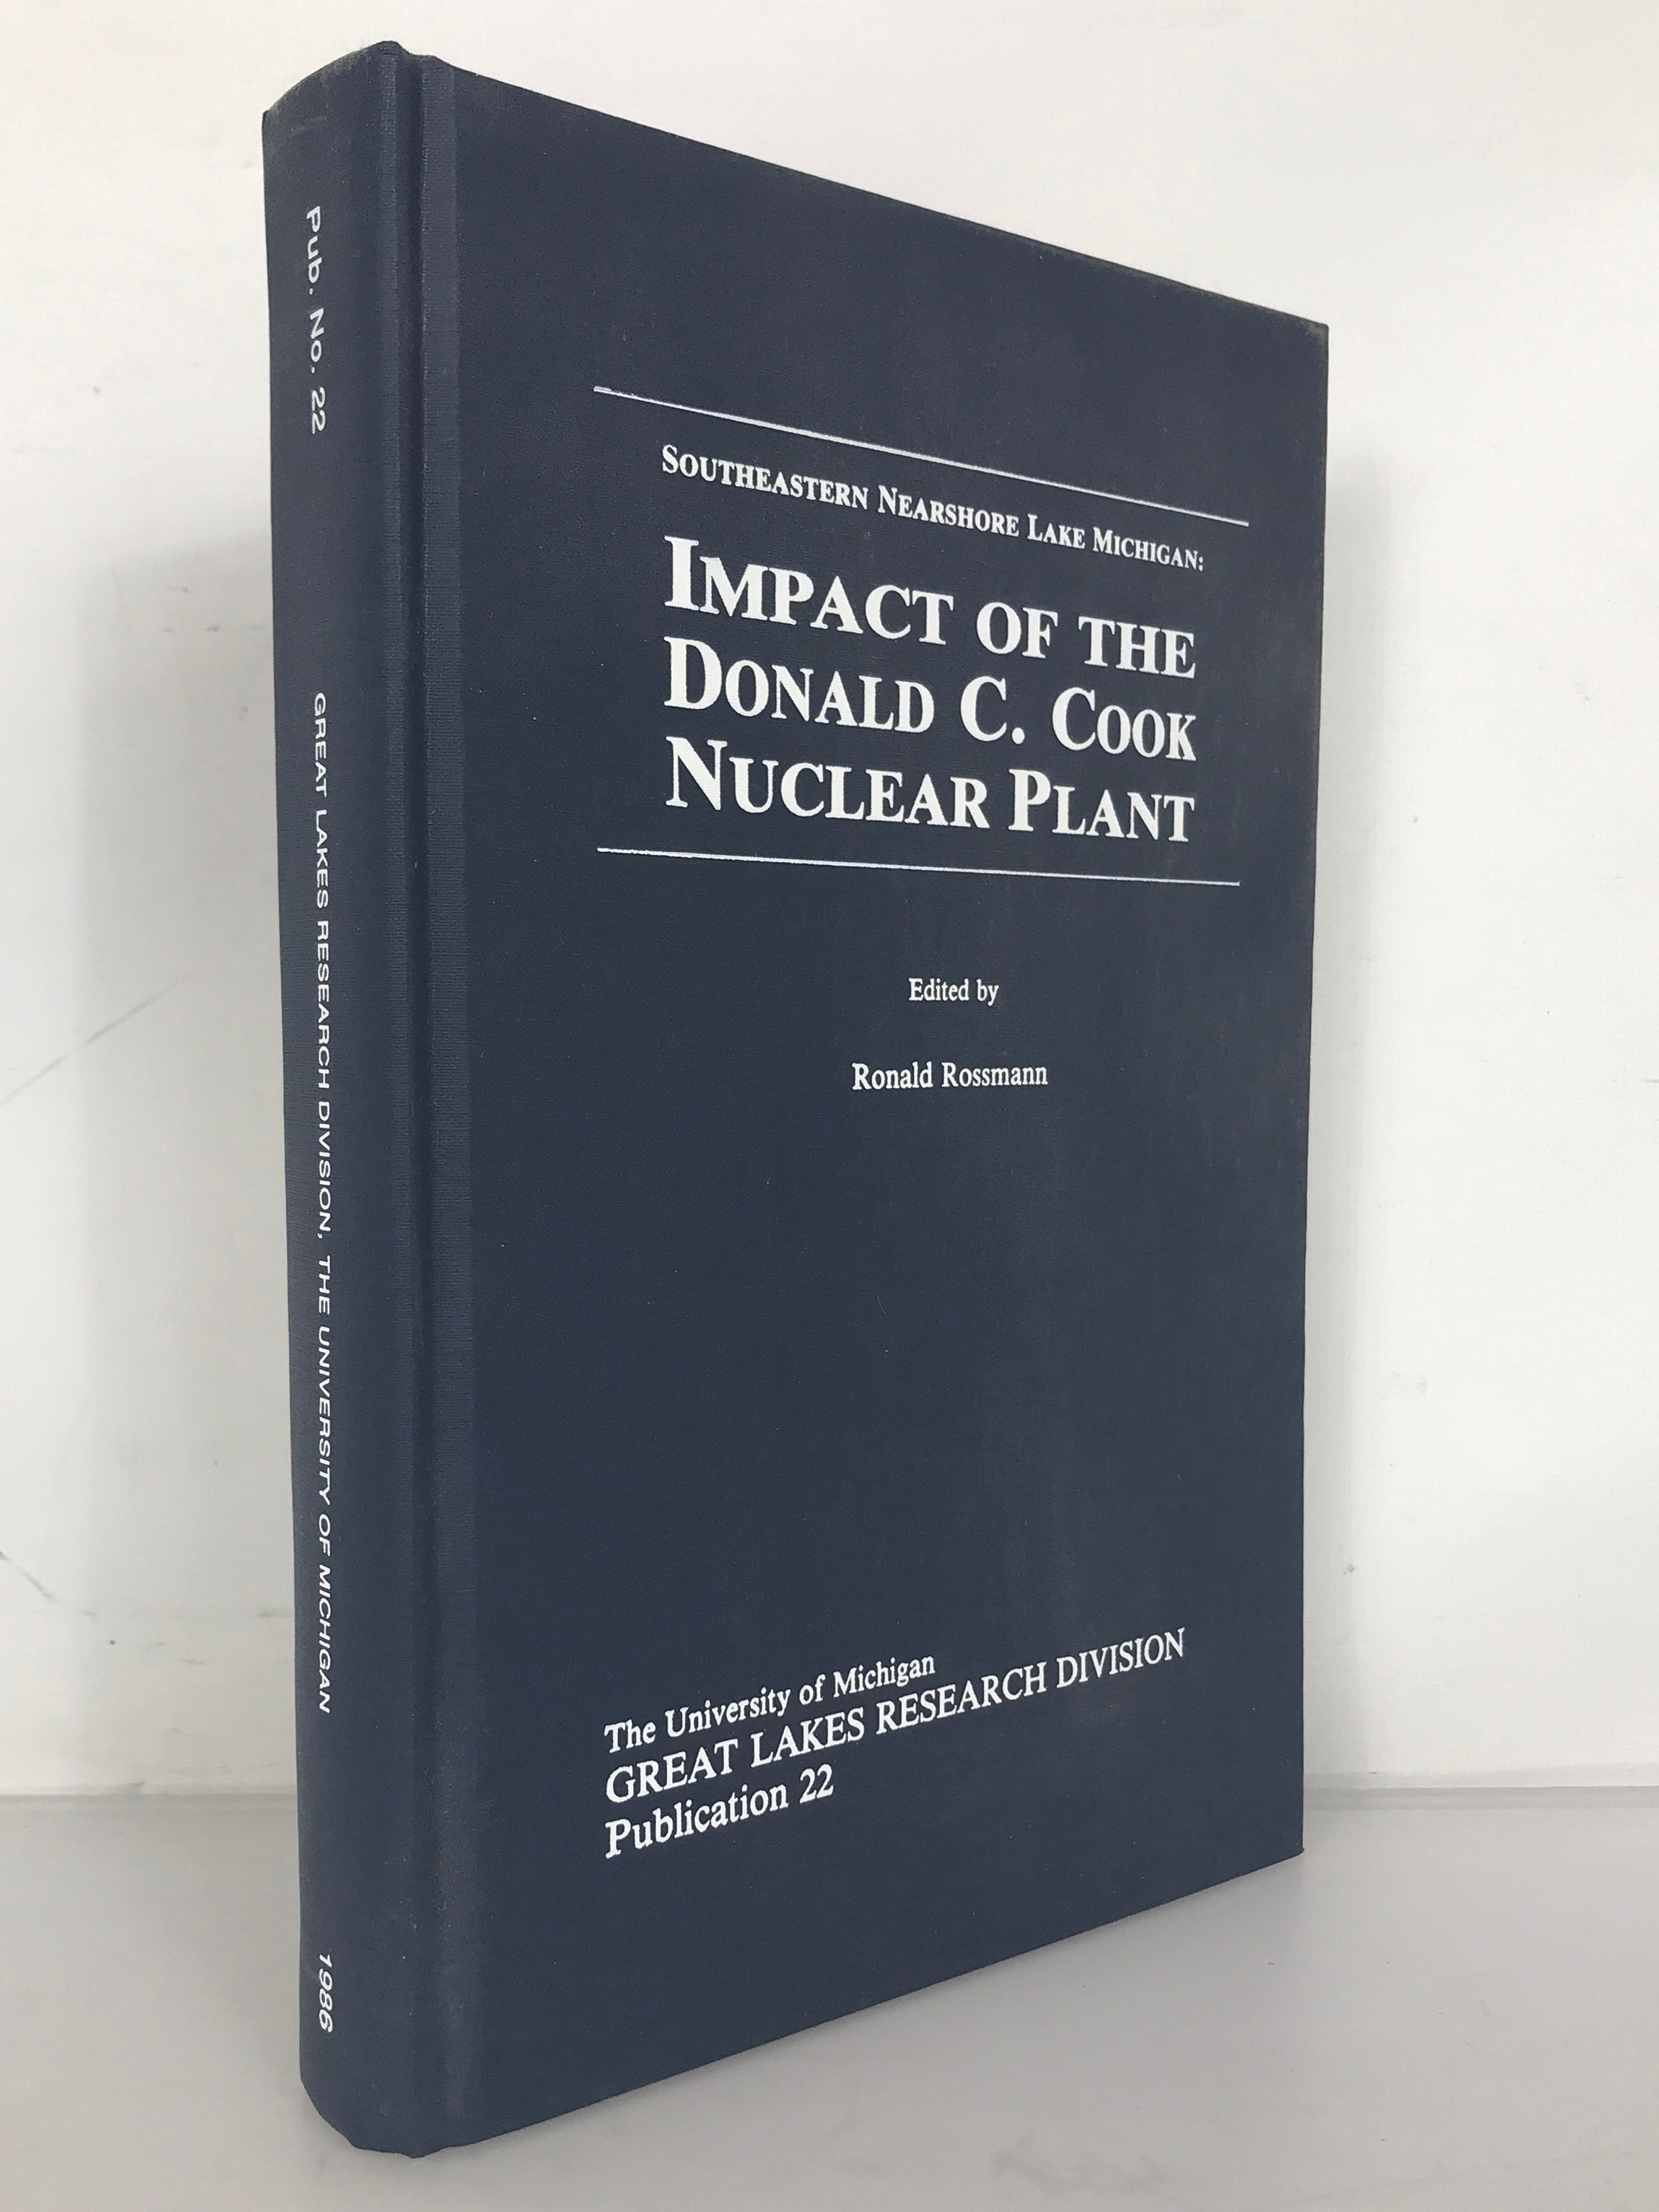 Impact of the Donald C. Cook Nuclear Plant by Ronald Rossman University of Michigan 1986 HC